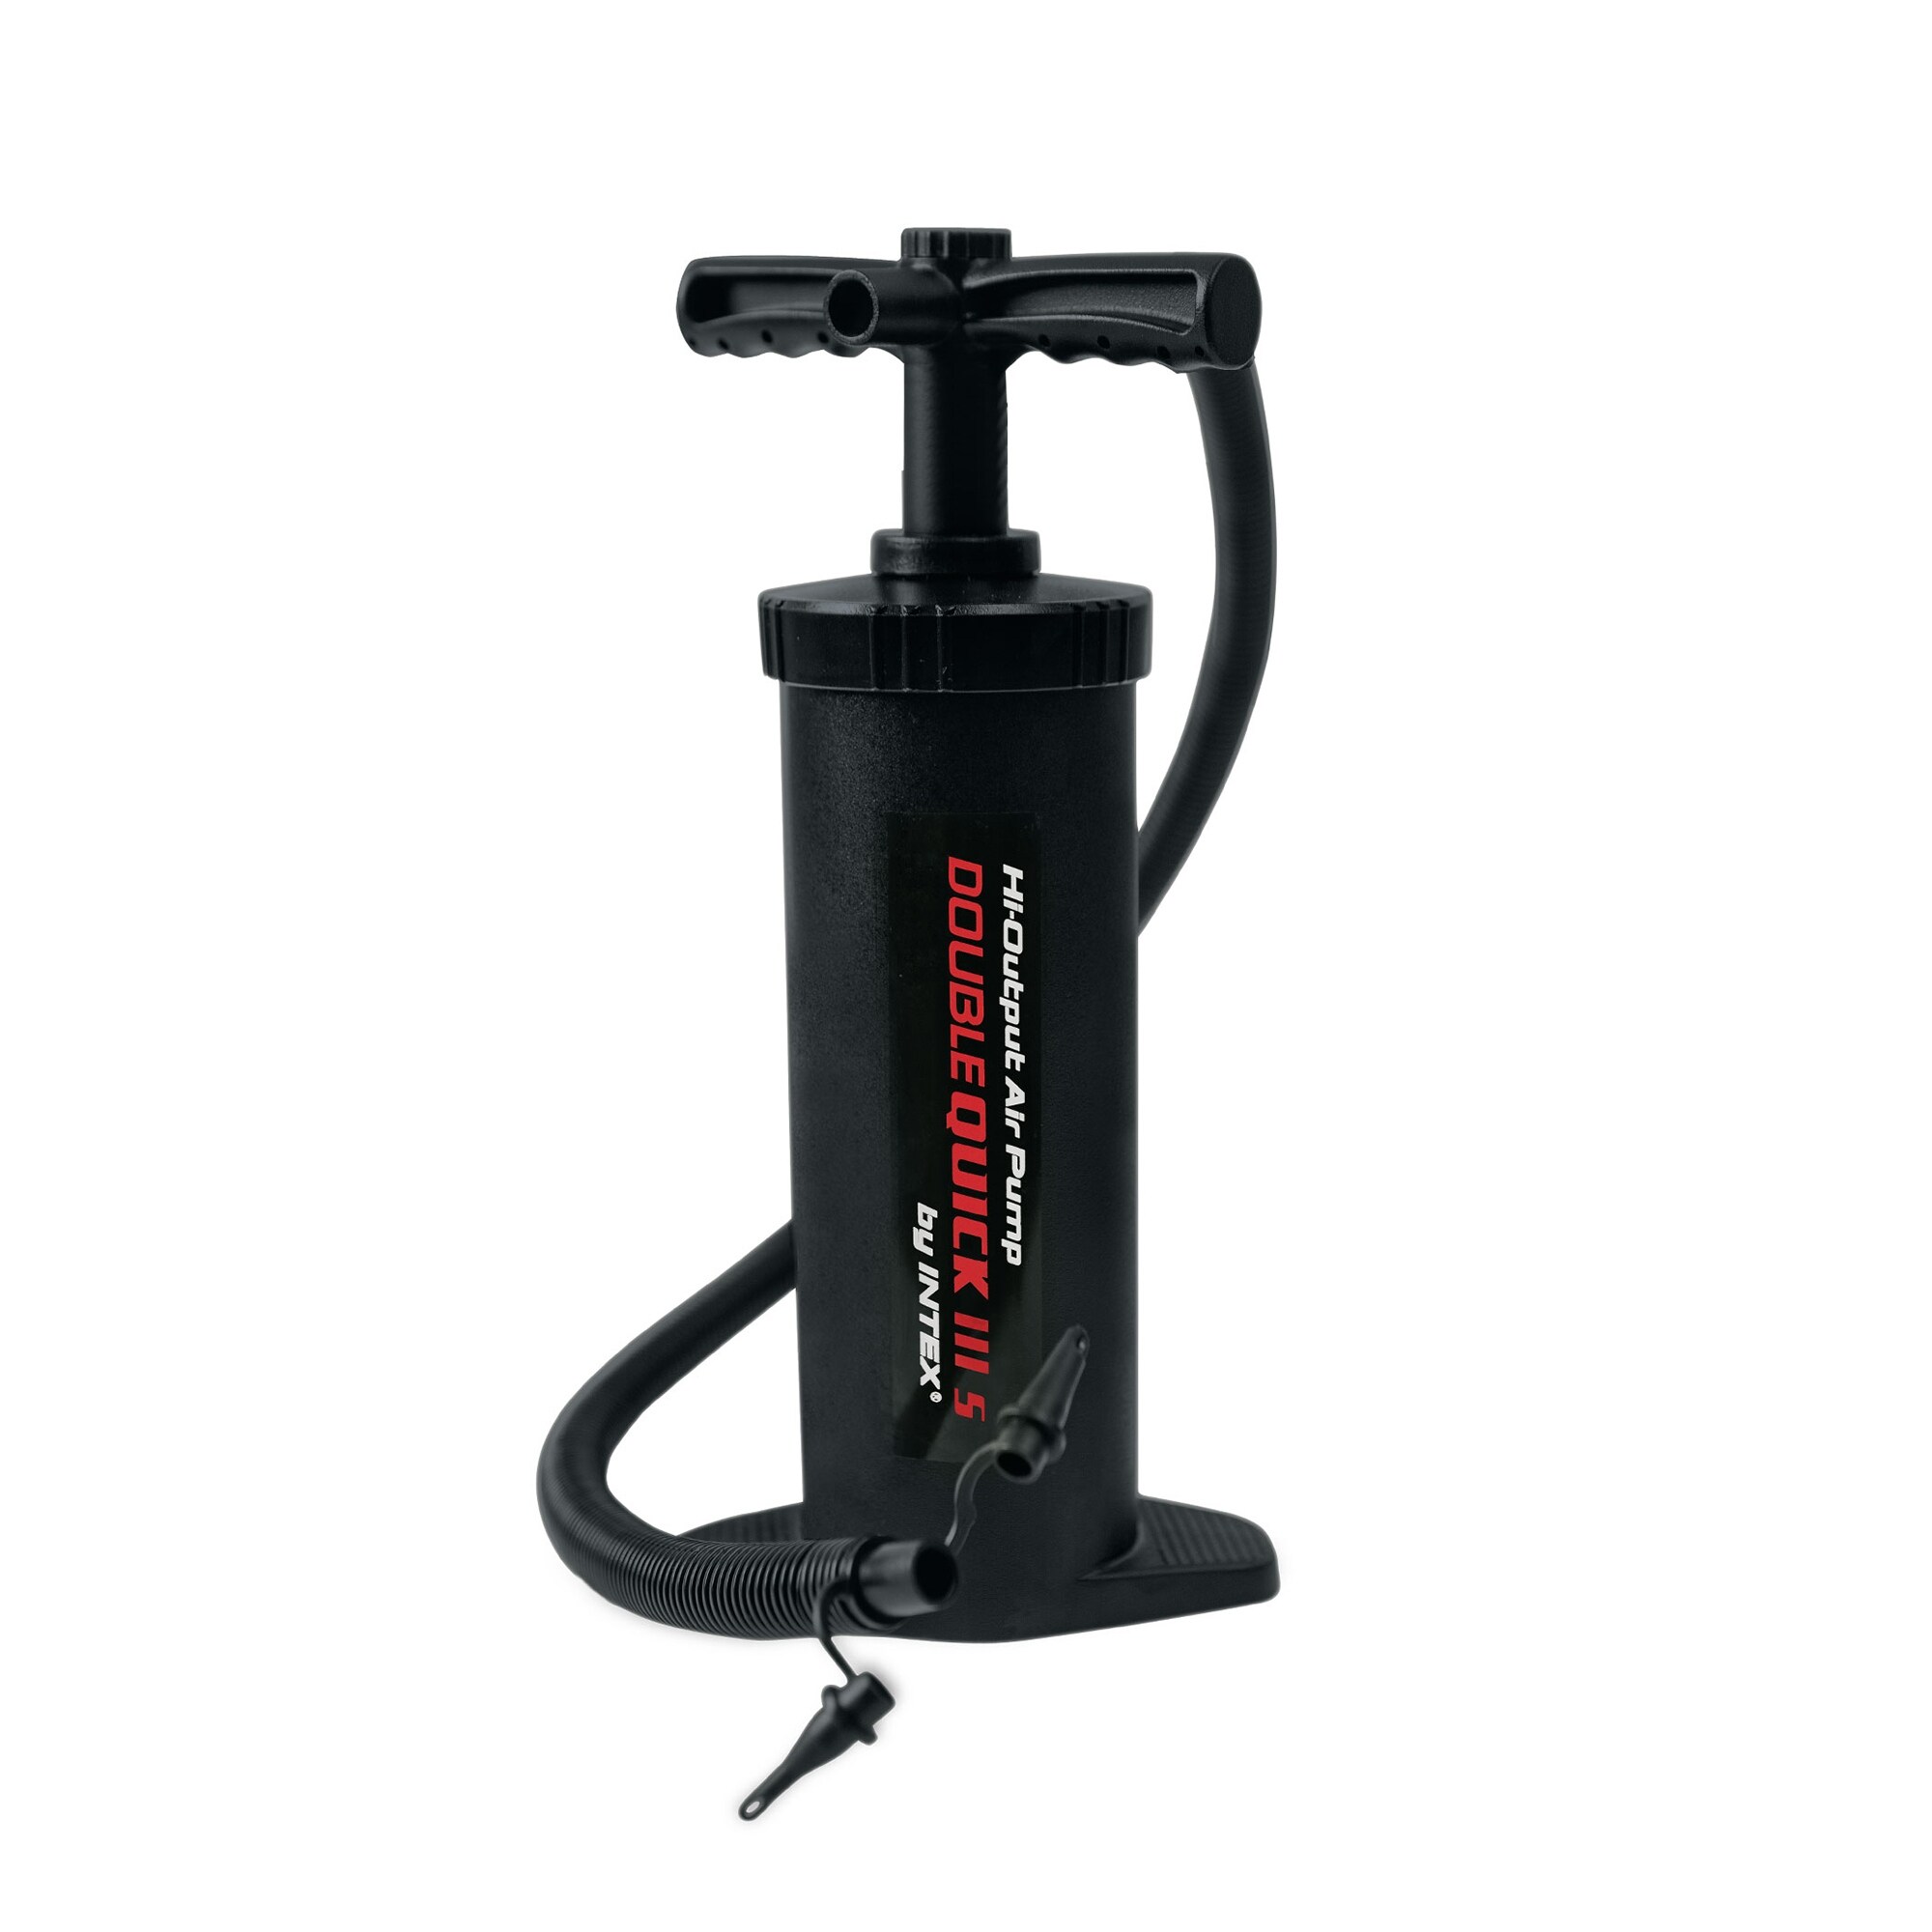 Intex Double Quick III S Hand Air Pump, Black, 14.5" Height - image 1 of 6